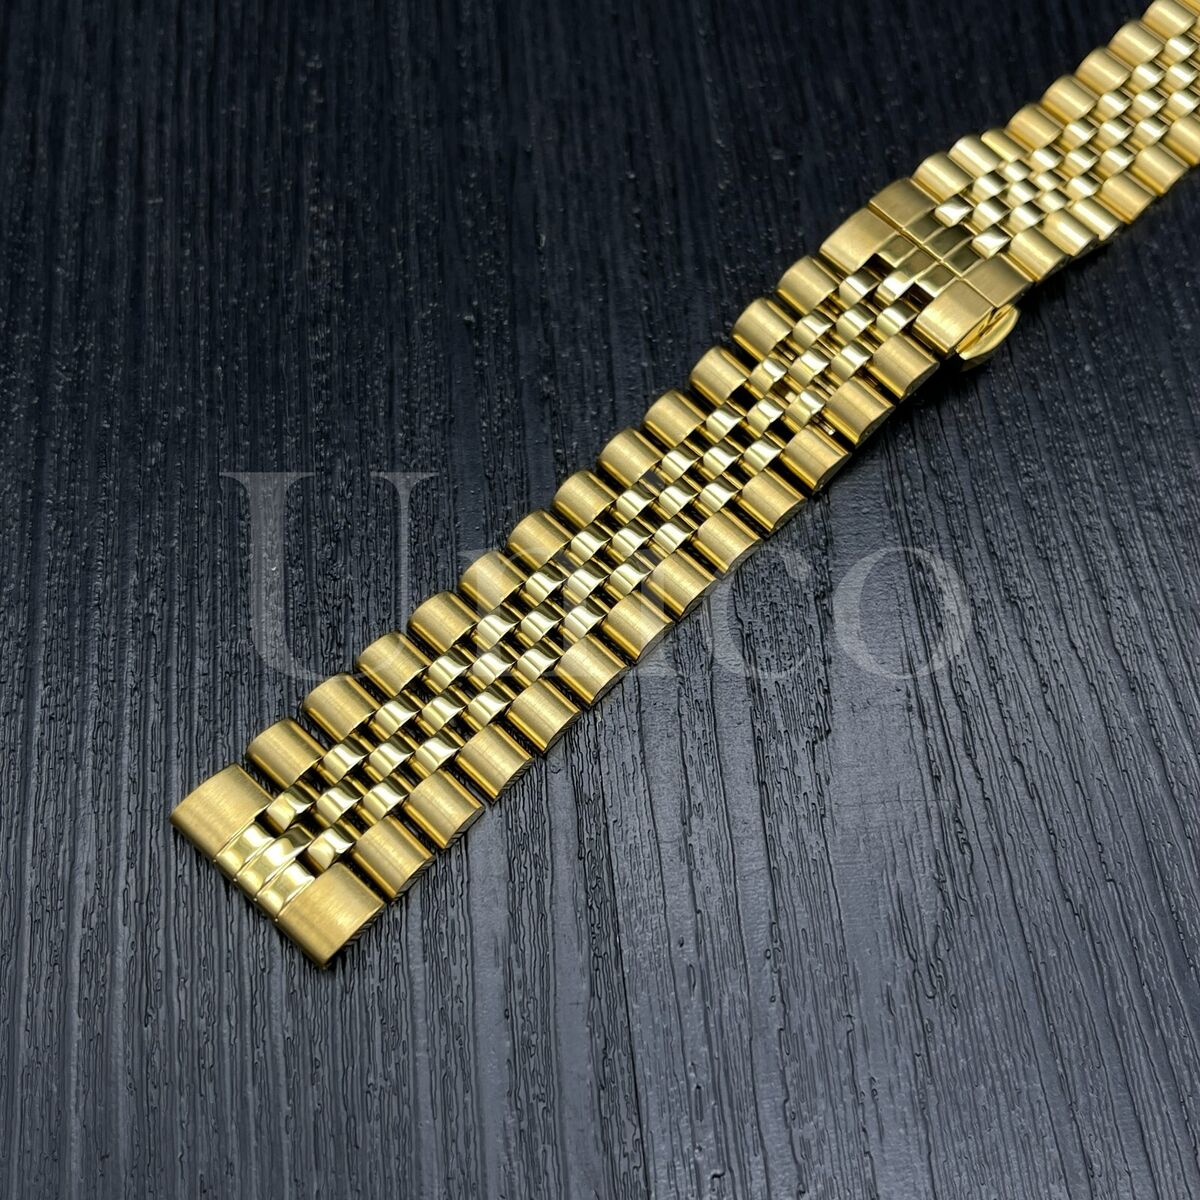 Amazon.com: FULNES Stainless steel watchband 6mm 8mm 10mm silver golden bracelet  Replacement strap for size dial lady fashion watch Bracelet (Color : Gold,  Size : 6mm) : Clothing, Shoes & Jewelry